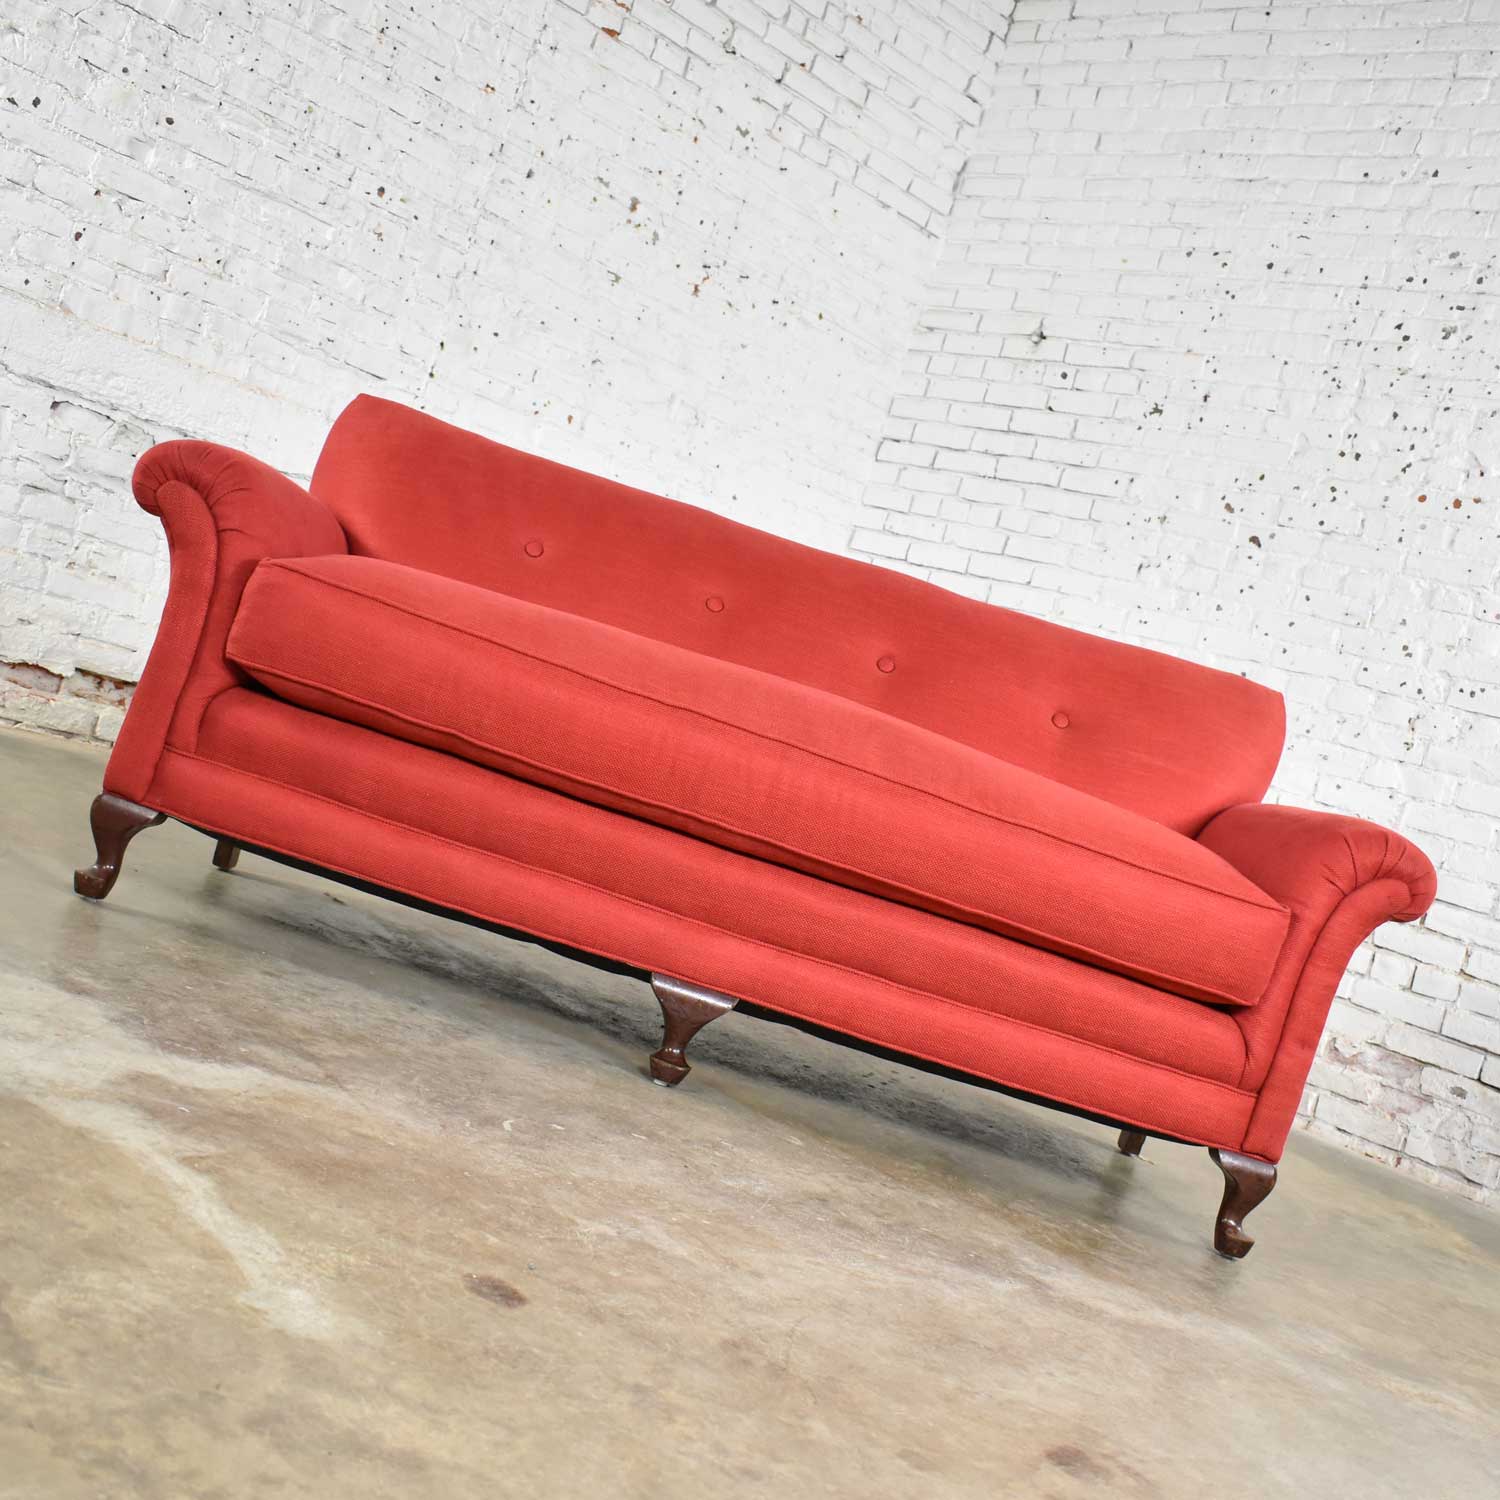 Red Smaller Size Lawson Sofa with Rolled Arms Down Bench Seat and Tight Back